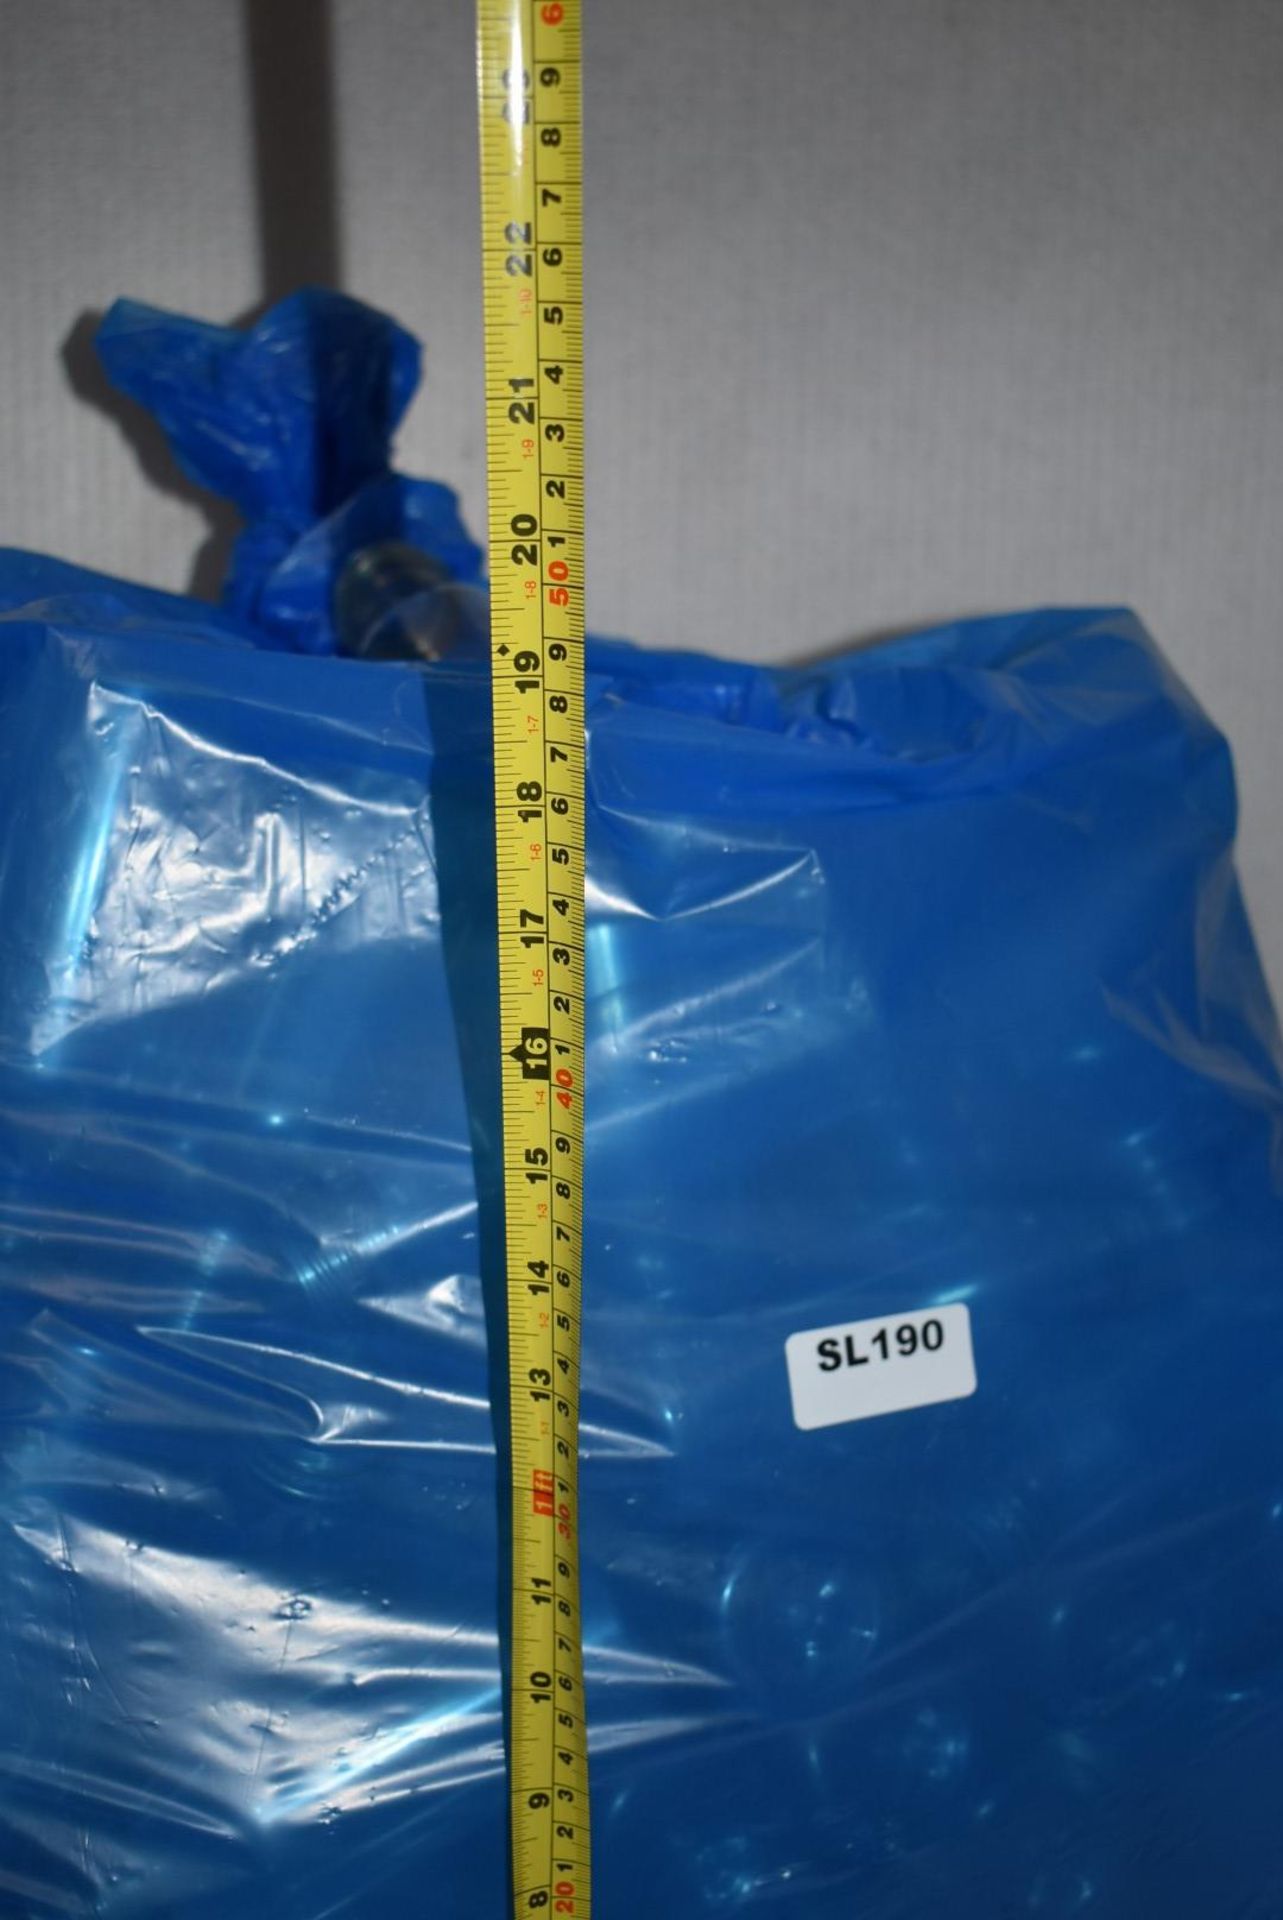 1 x Large Bag of Unused Plastic Bottles - Recently Removed From a Vegan Deli - CL999 - Ref: SL190 - Image 4 of 6